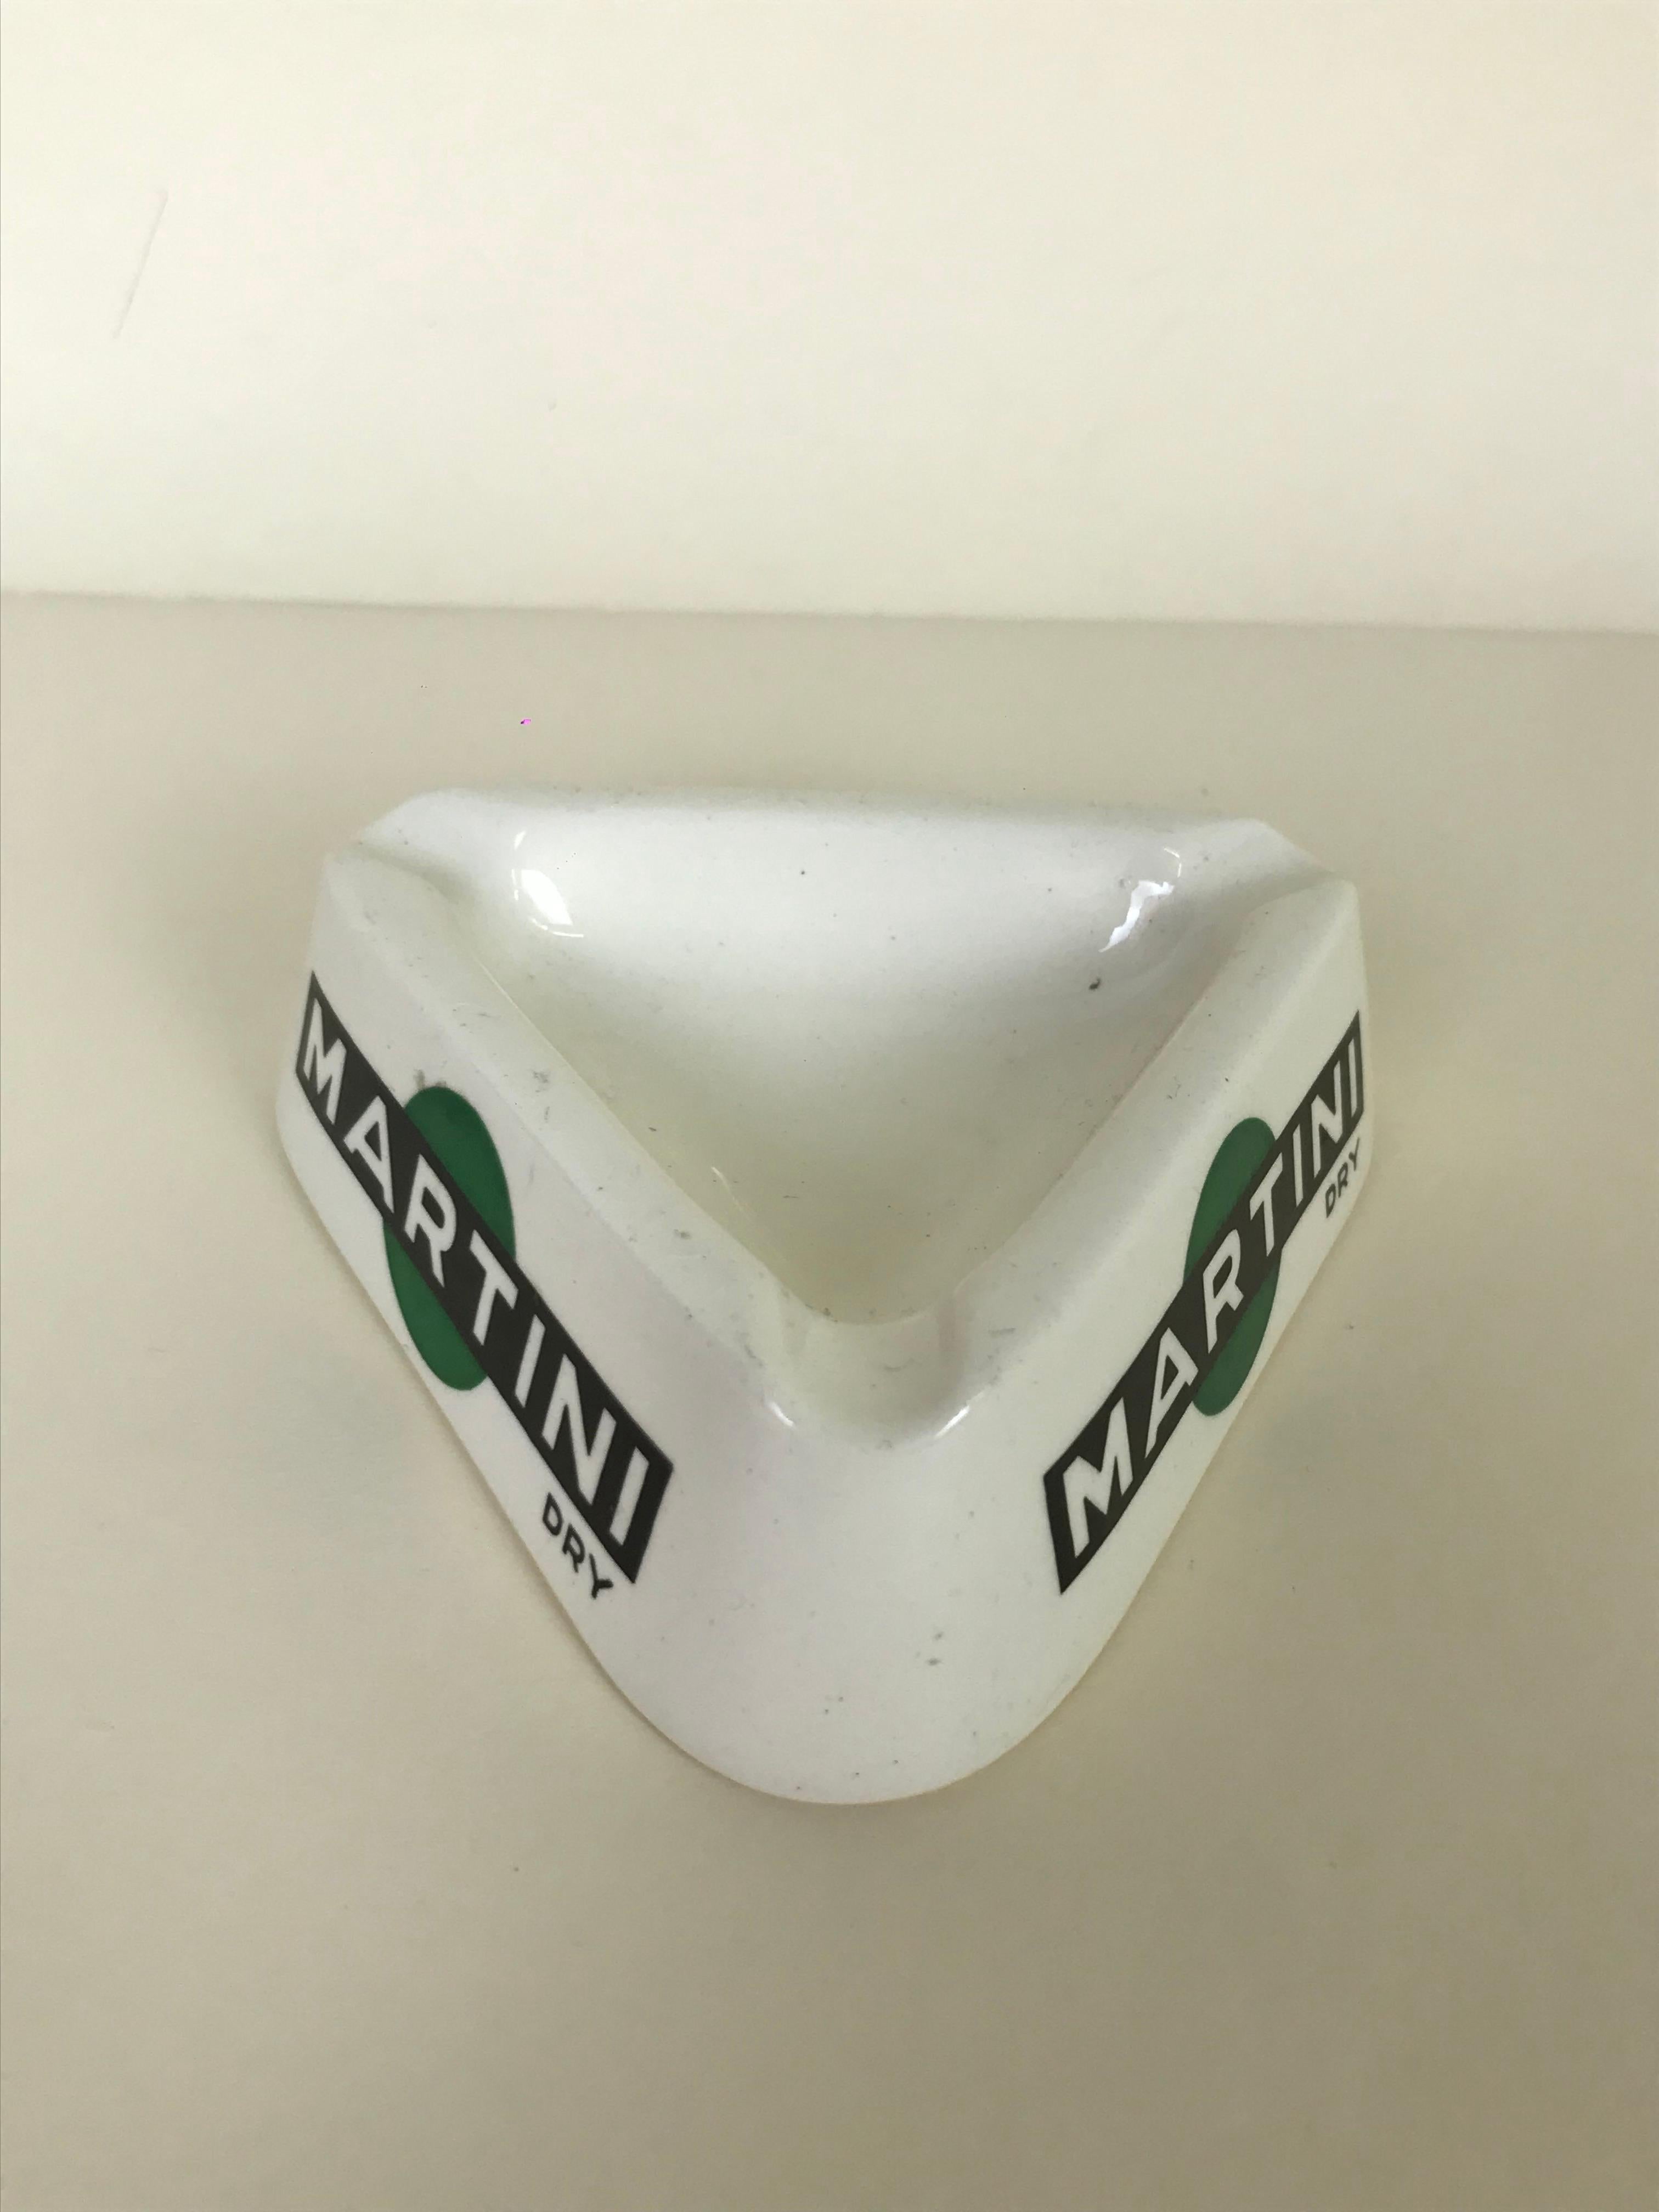 1950s Italian vintage advertising white triangular ashtray with Martini Dry logo in black and green on all three sides, in ceramic by Richard Ginori.

Marked on bottom 